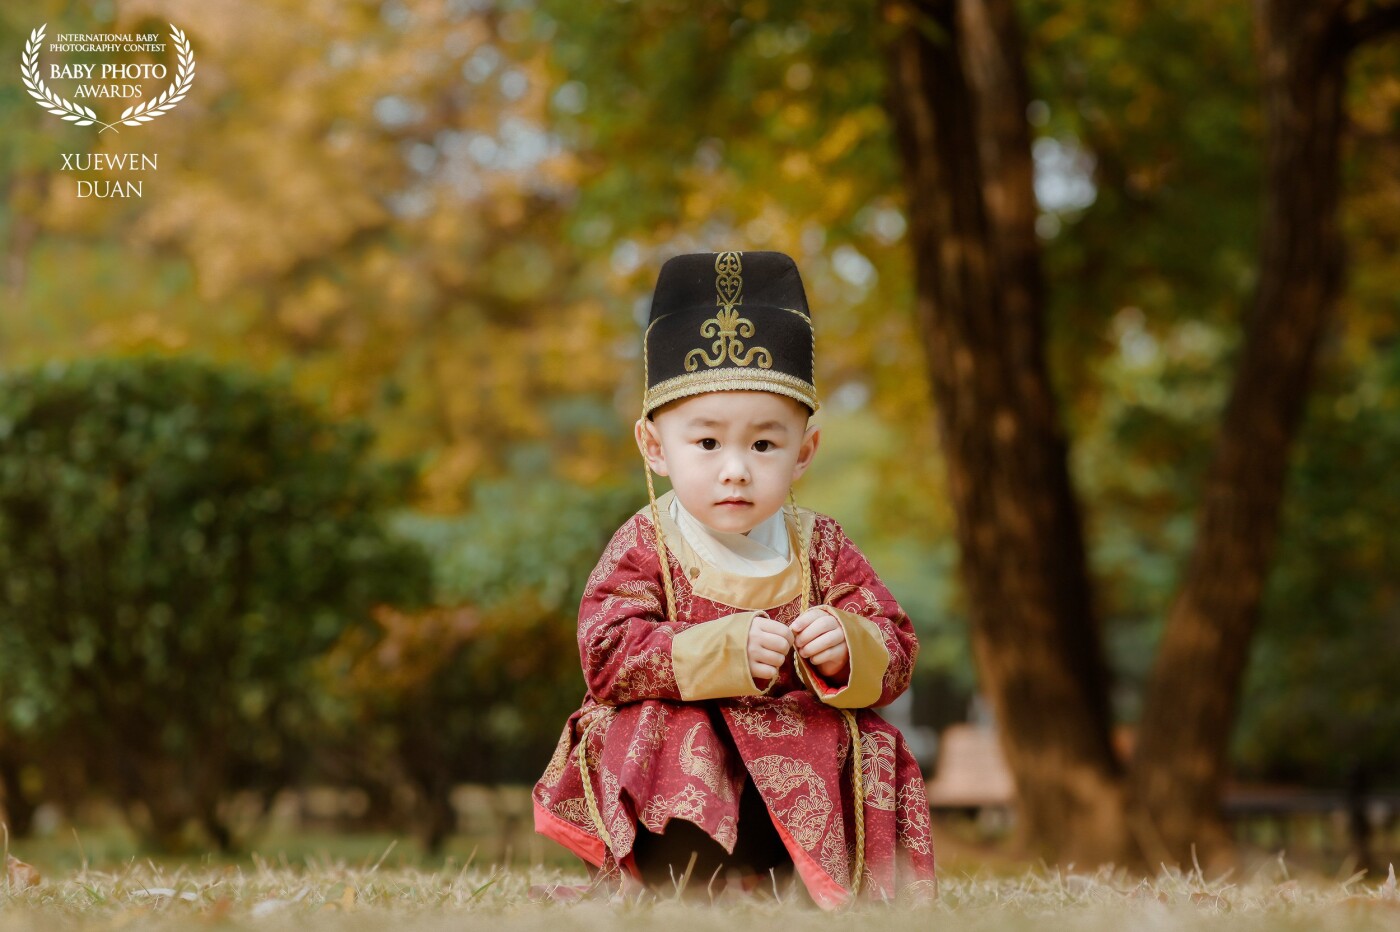 This is a little emperor from China. He didn't come to take pictures, but just wanted to pick up leaves. When we called him, he looked so cute with a hooded face.